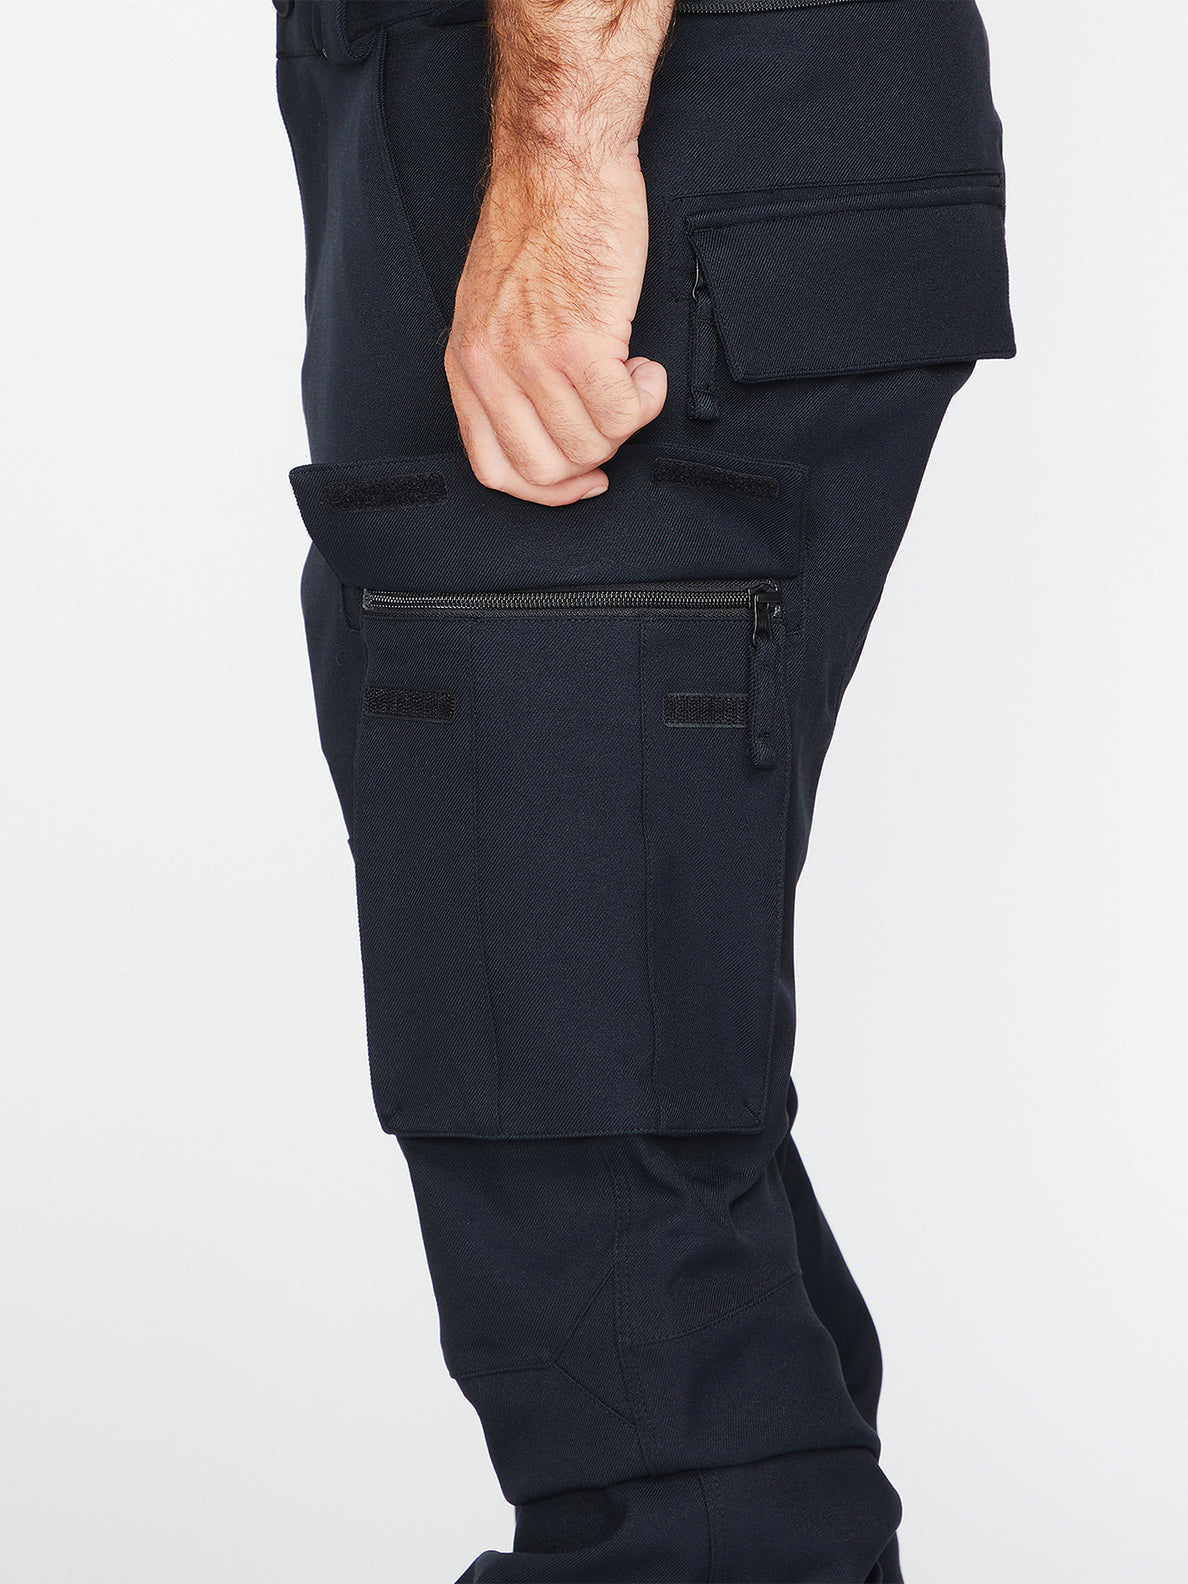 Mens New Articulated Pants - Black (G1352305_BLK) [26]